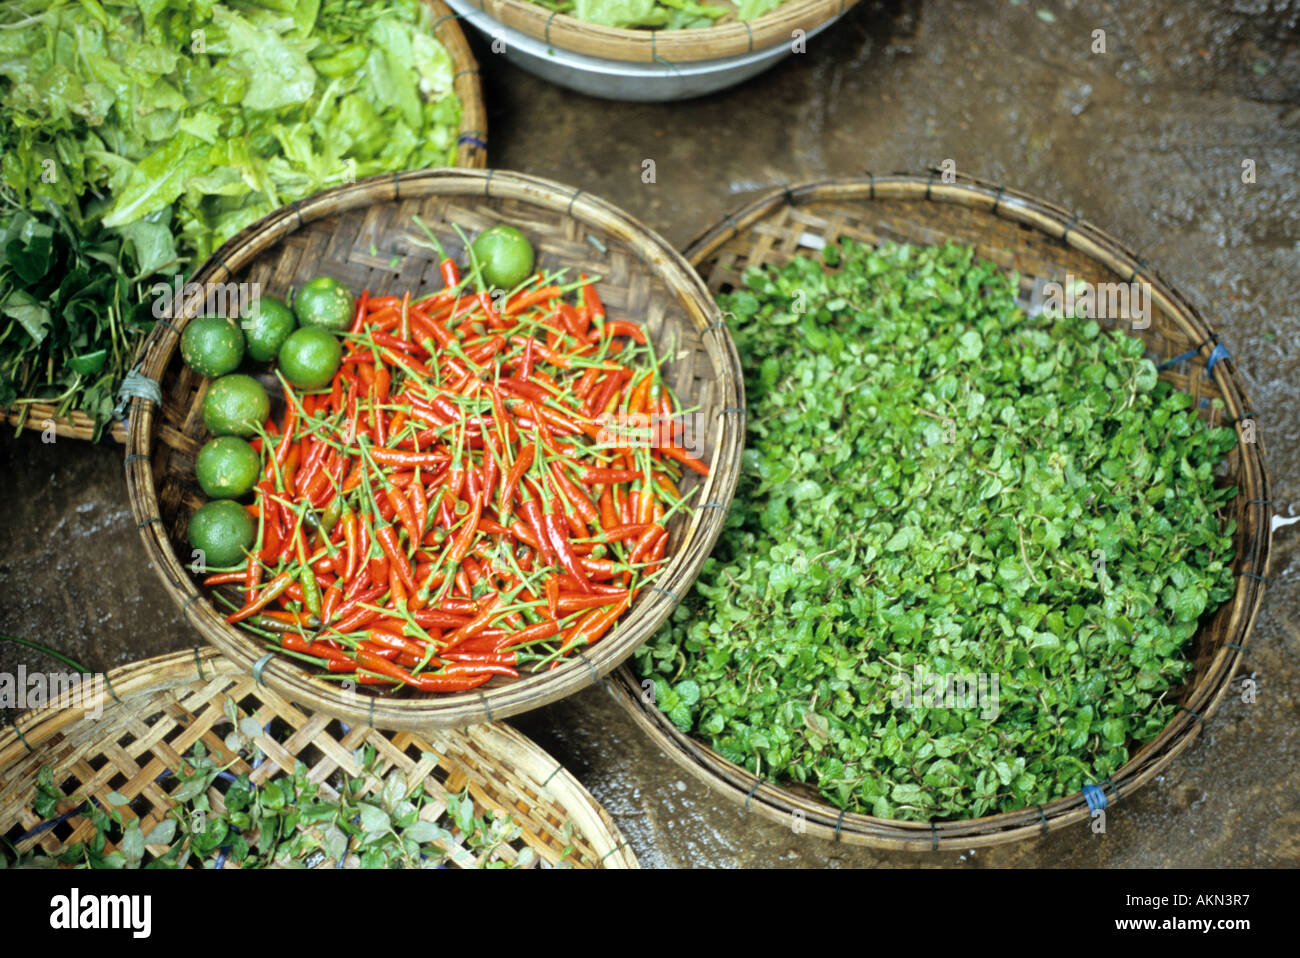 Baskets of fresh herbs, chillies and limes for sale on the road in the Bach Dang St market, Hoi An, Viet Nam Stock Photo